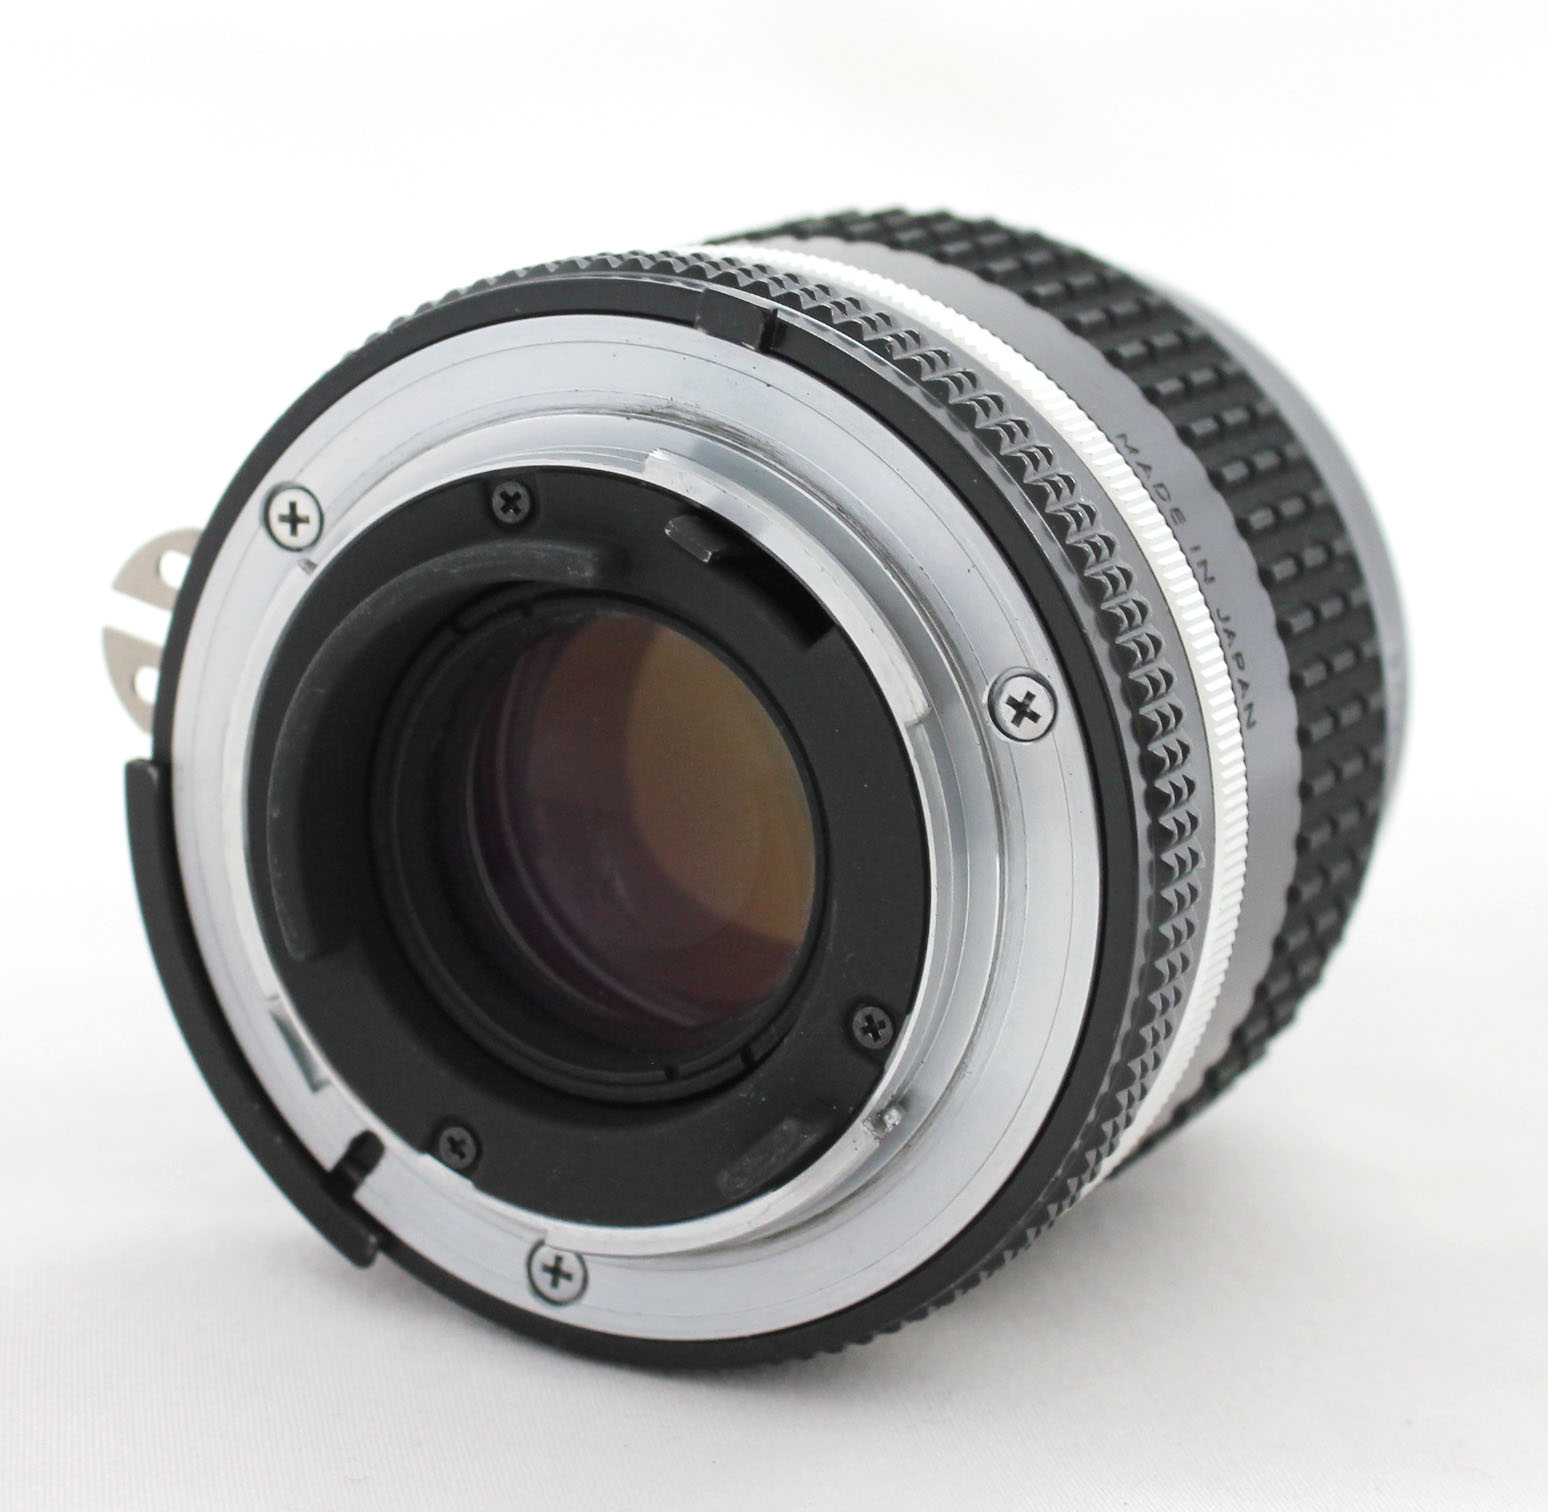 Nikon Ai-s Ais Nikkor 35mm F/2 Wide Angle MF Lens S/N32* SIC Version with Hood HN-3 from Japan Photo 1